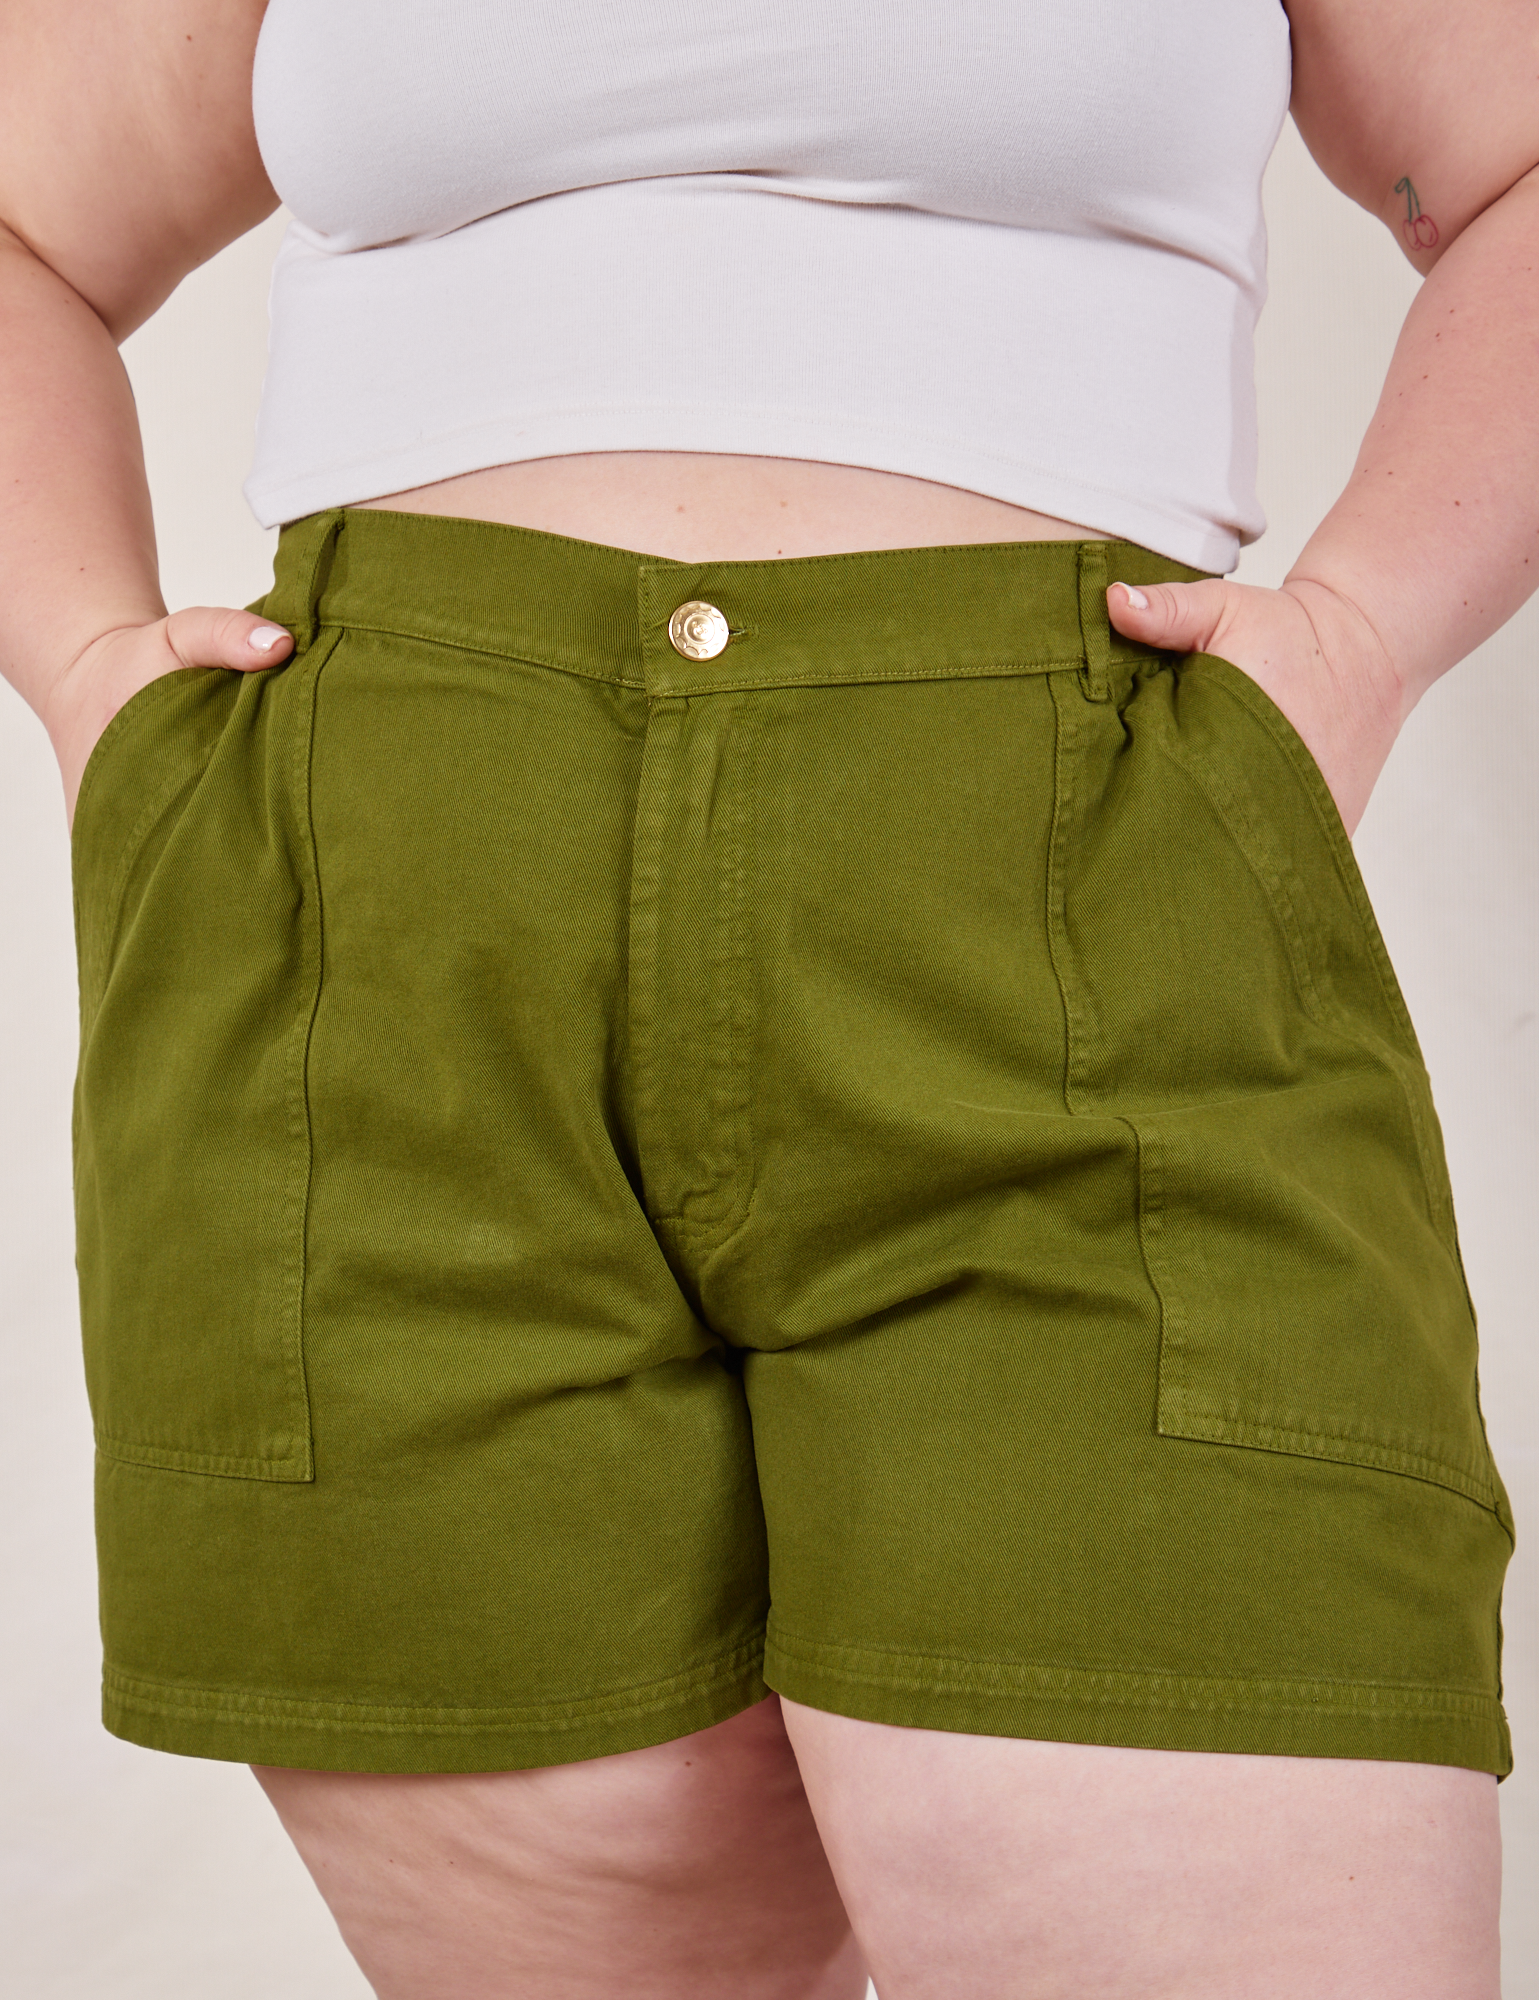 Classic Work Shorts in Summer Olive front close up on Ashley